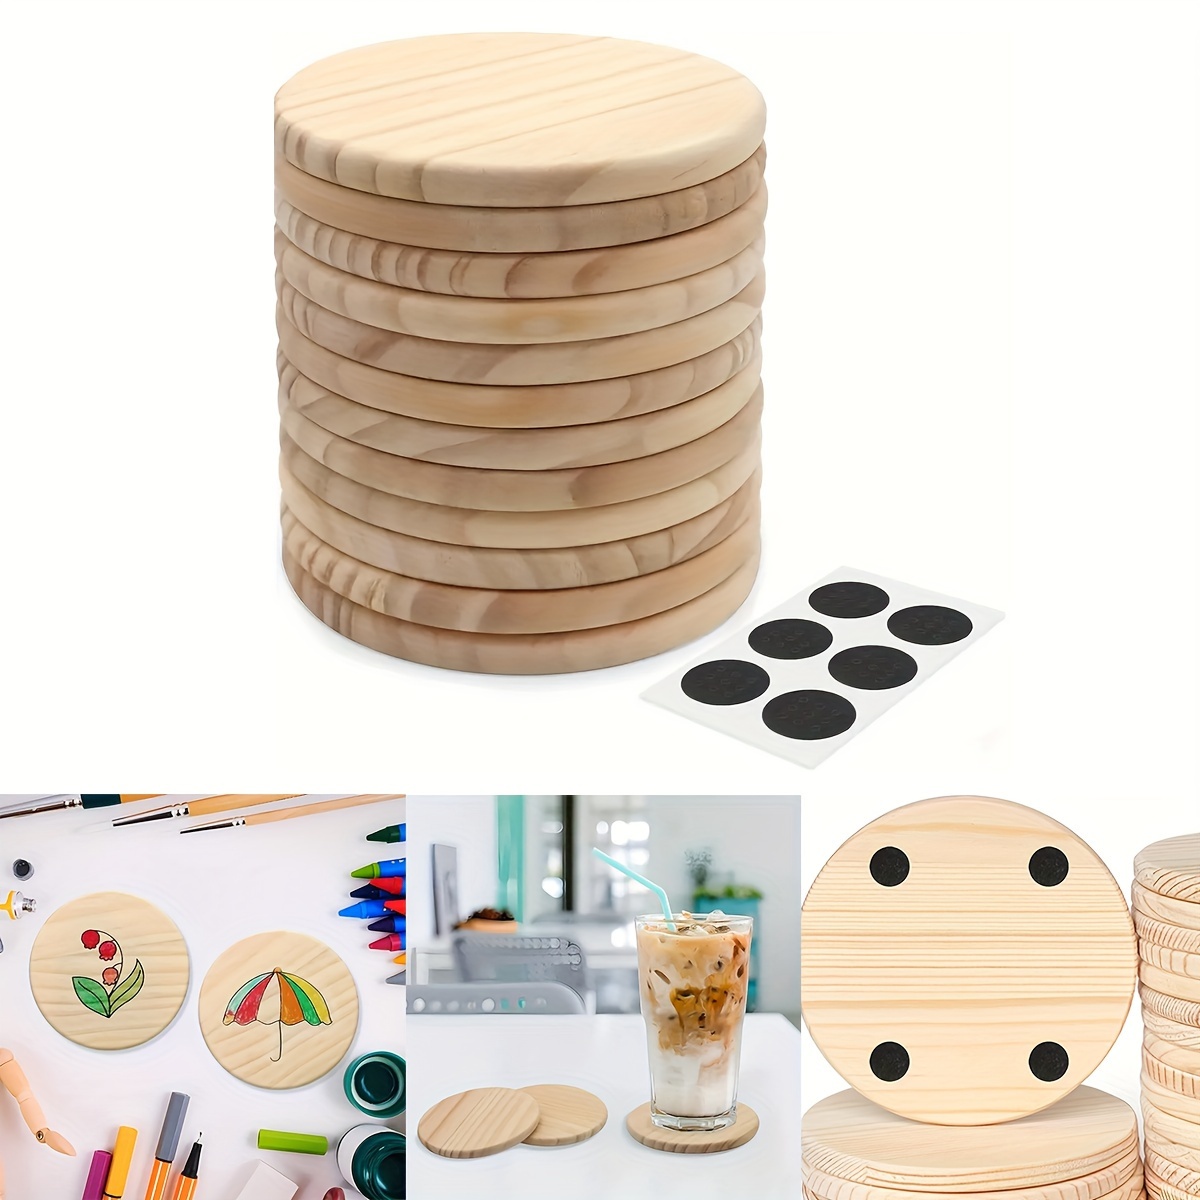 

Crafty Wooden Coaster Set: 12 Round, Blank Coasters With Non-slip Grips For Diy Dyeing, Painting, And Woodworking Projects